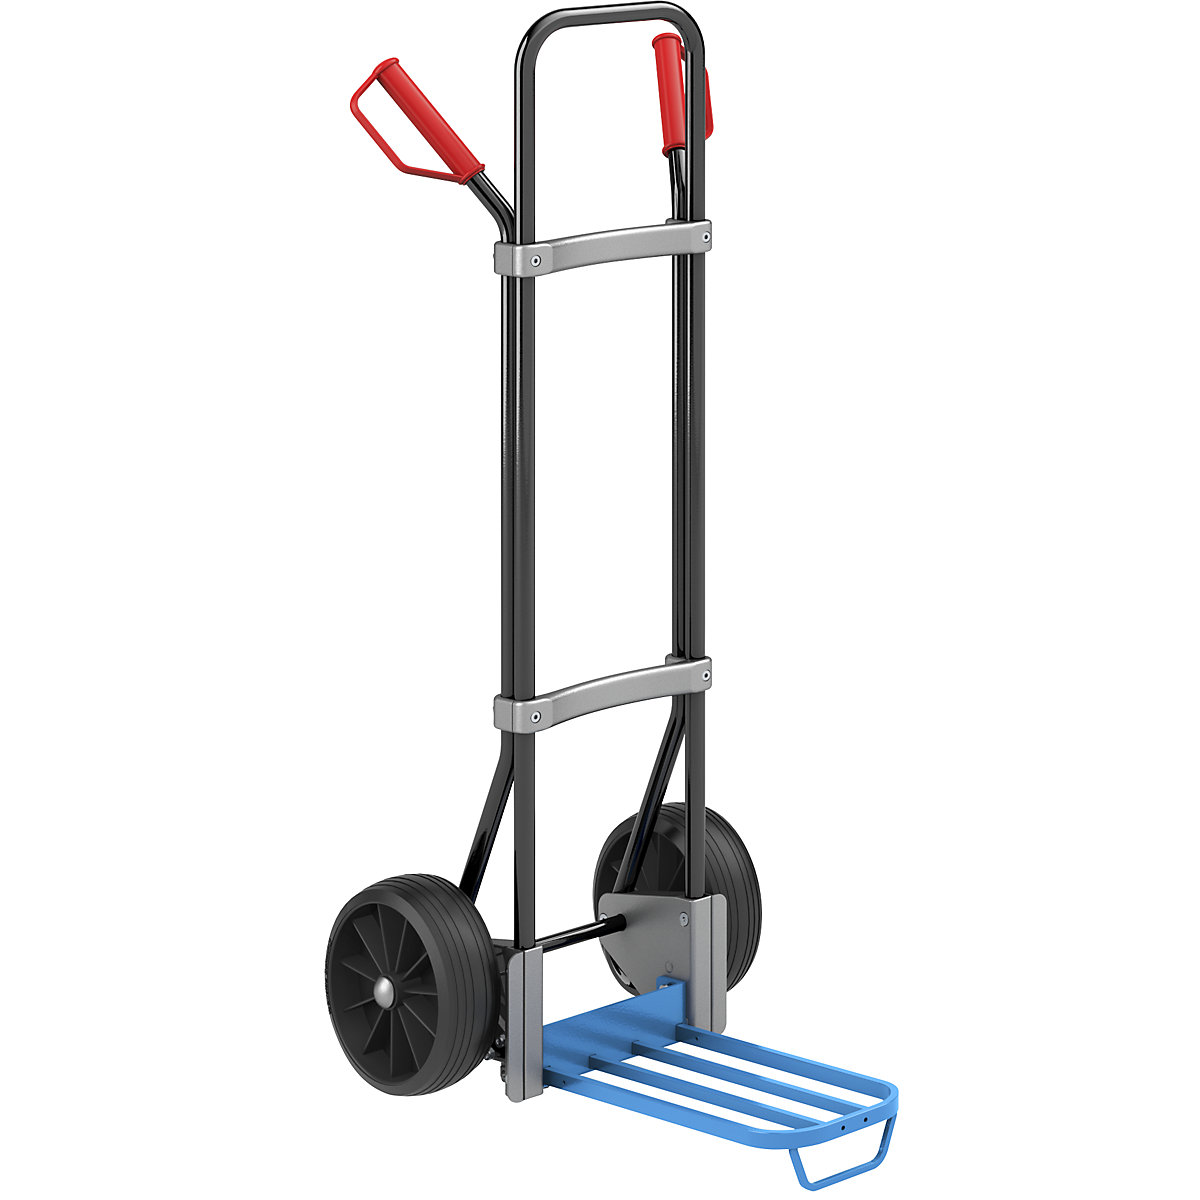 Sack truck, black – eurokraft pro, parcel footplate WxD 430 x 250 mm, blue, with handle, solid rubber tyres, 2+ items-2